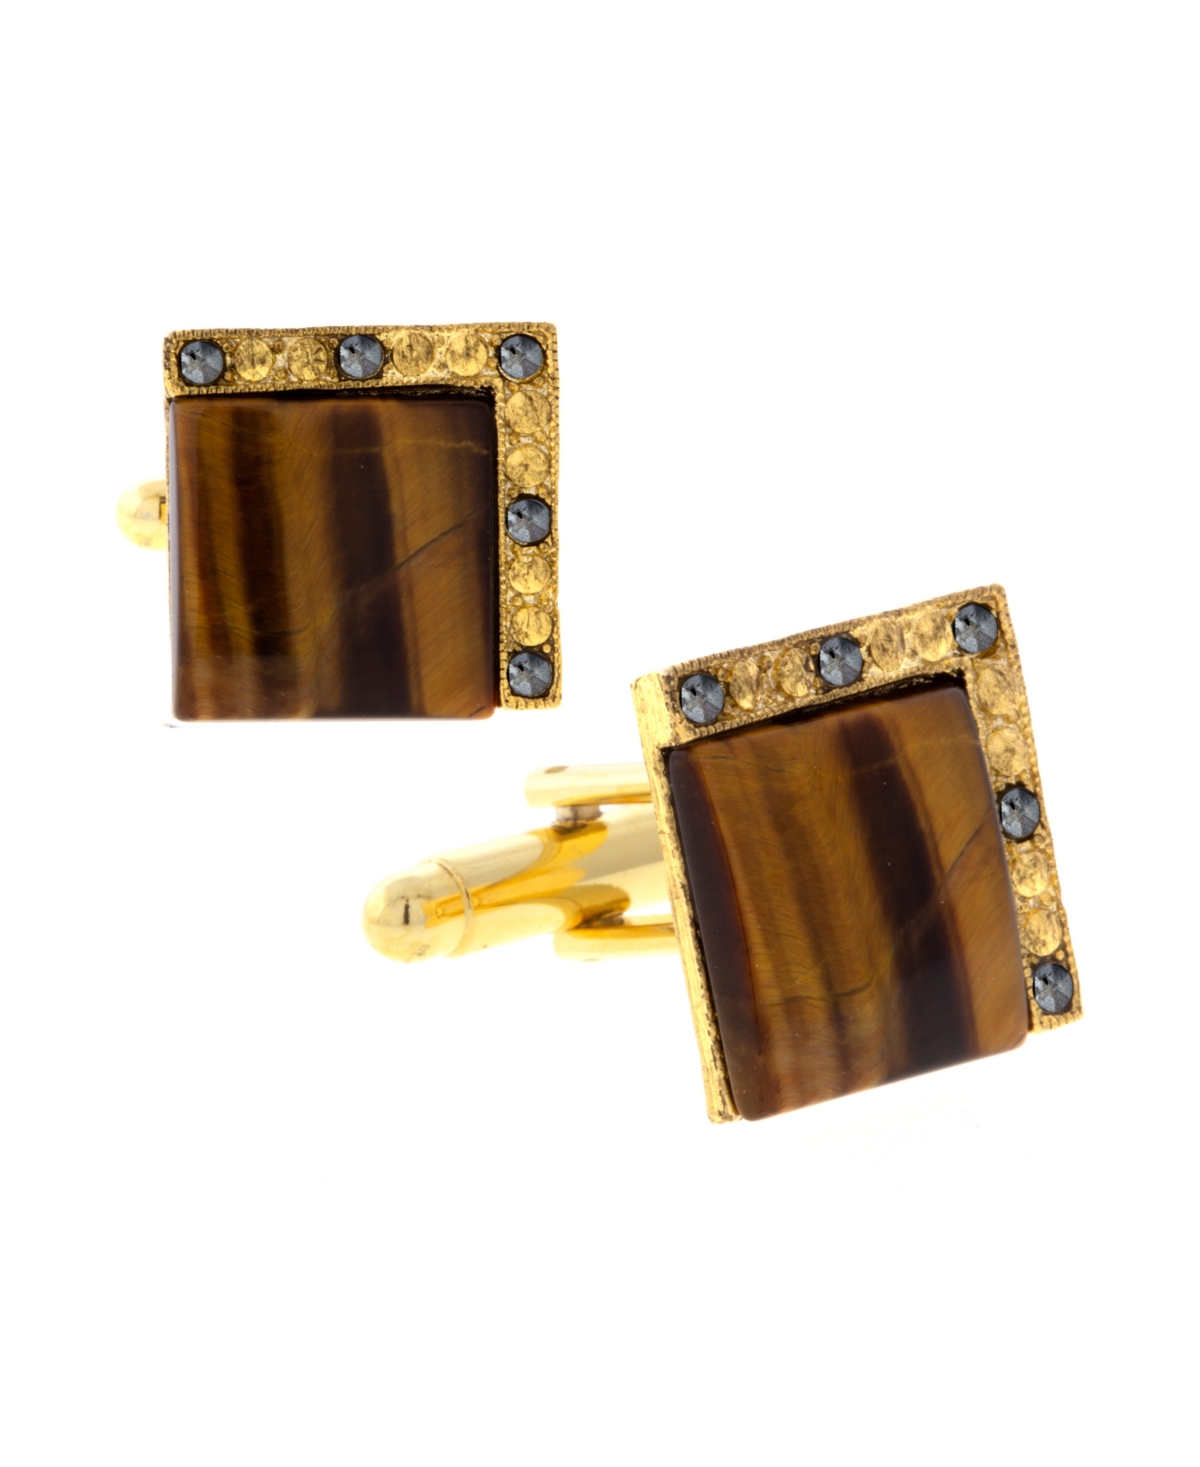 1928 Jewelry 14k Gold Plated Tiger's Eye Square Cufflinks In Brown